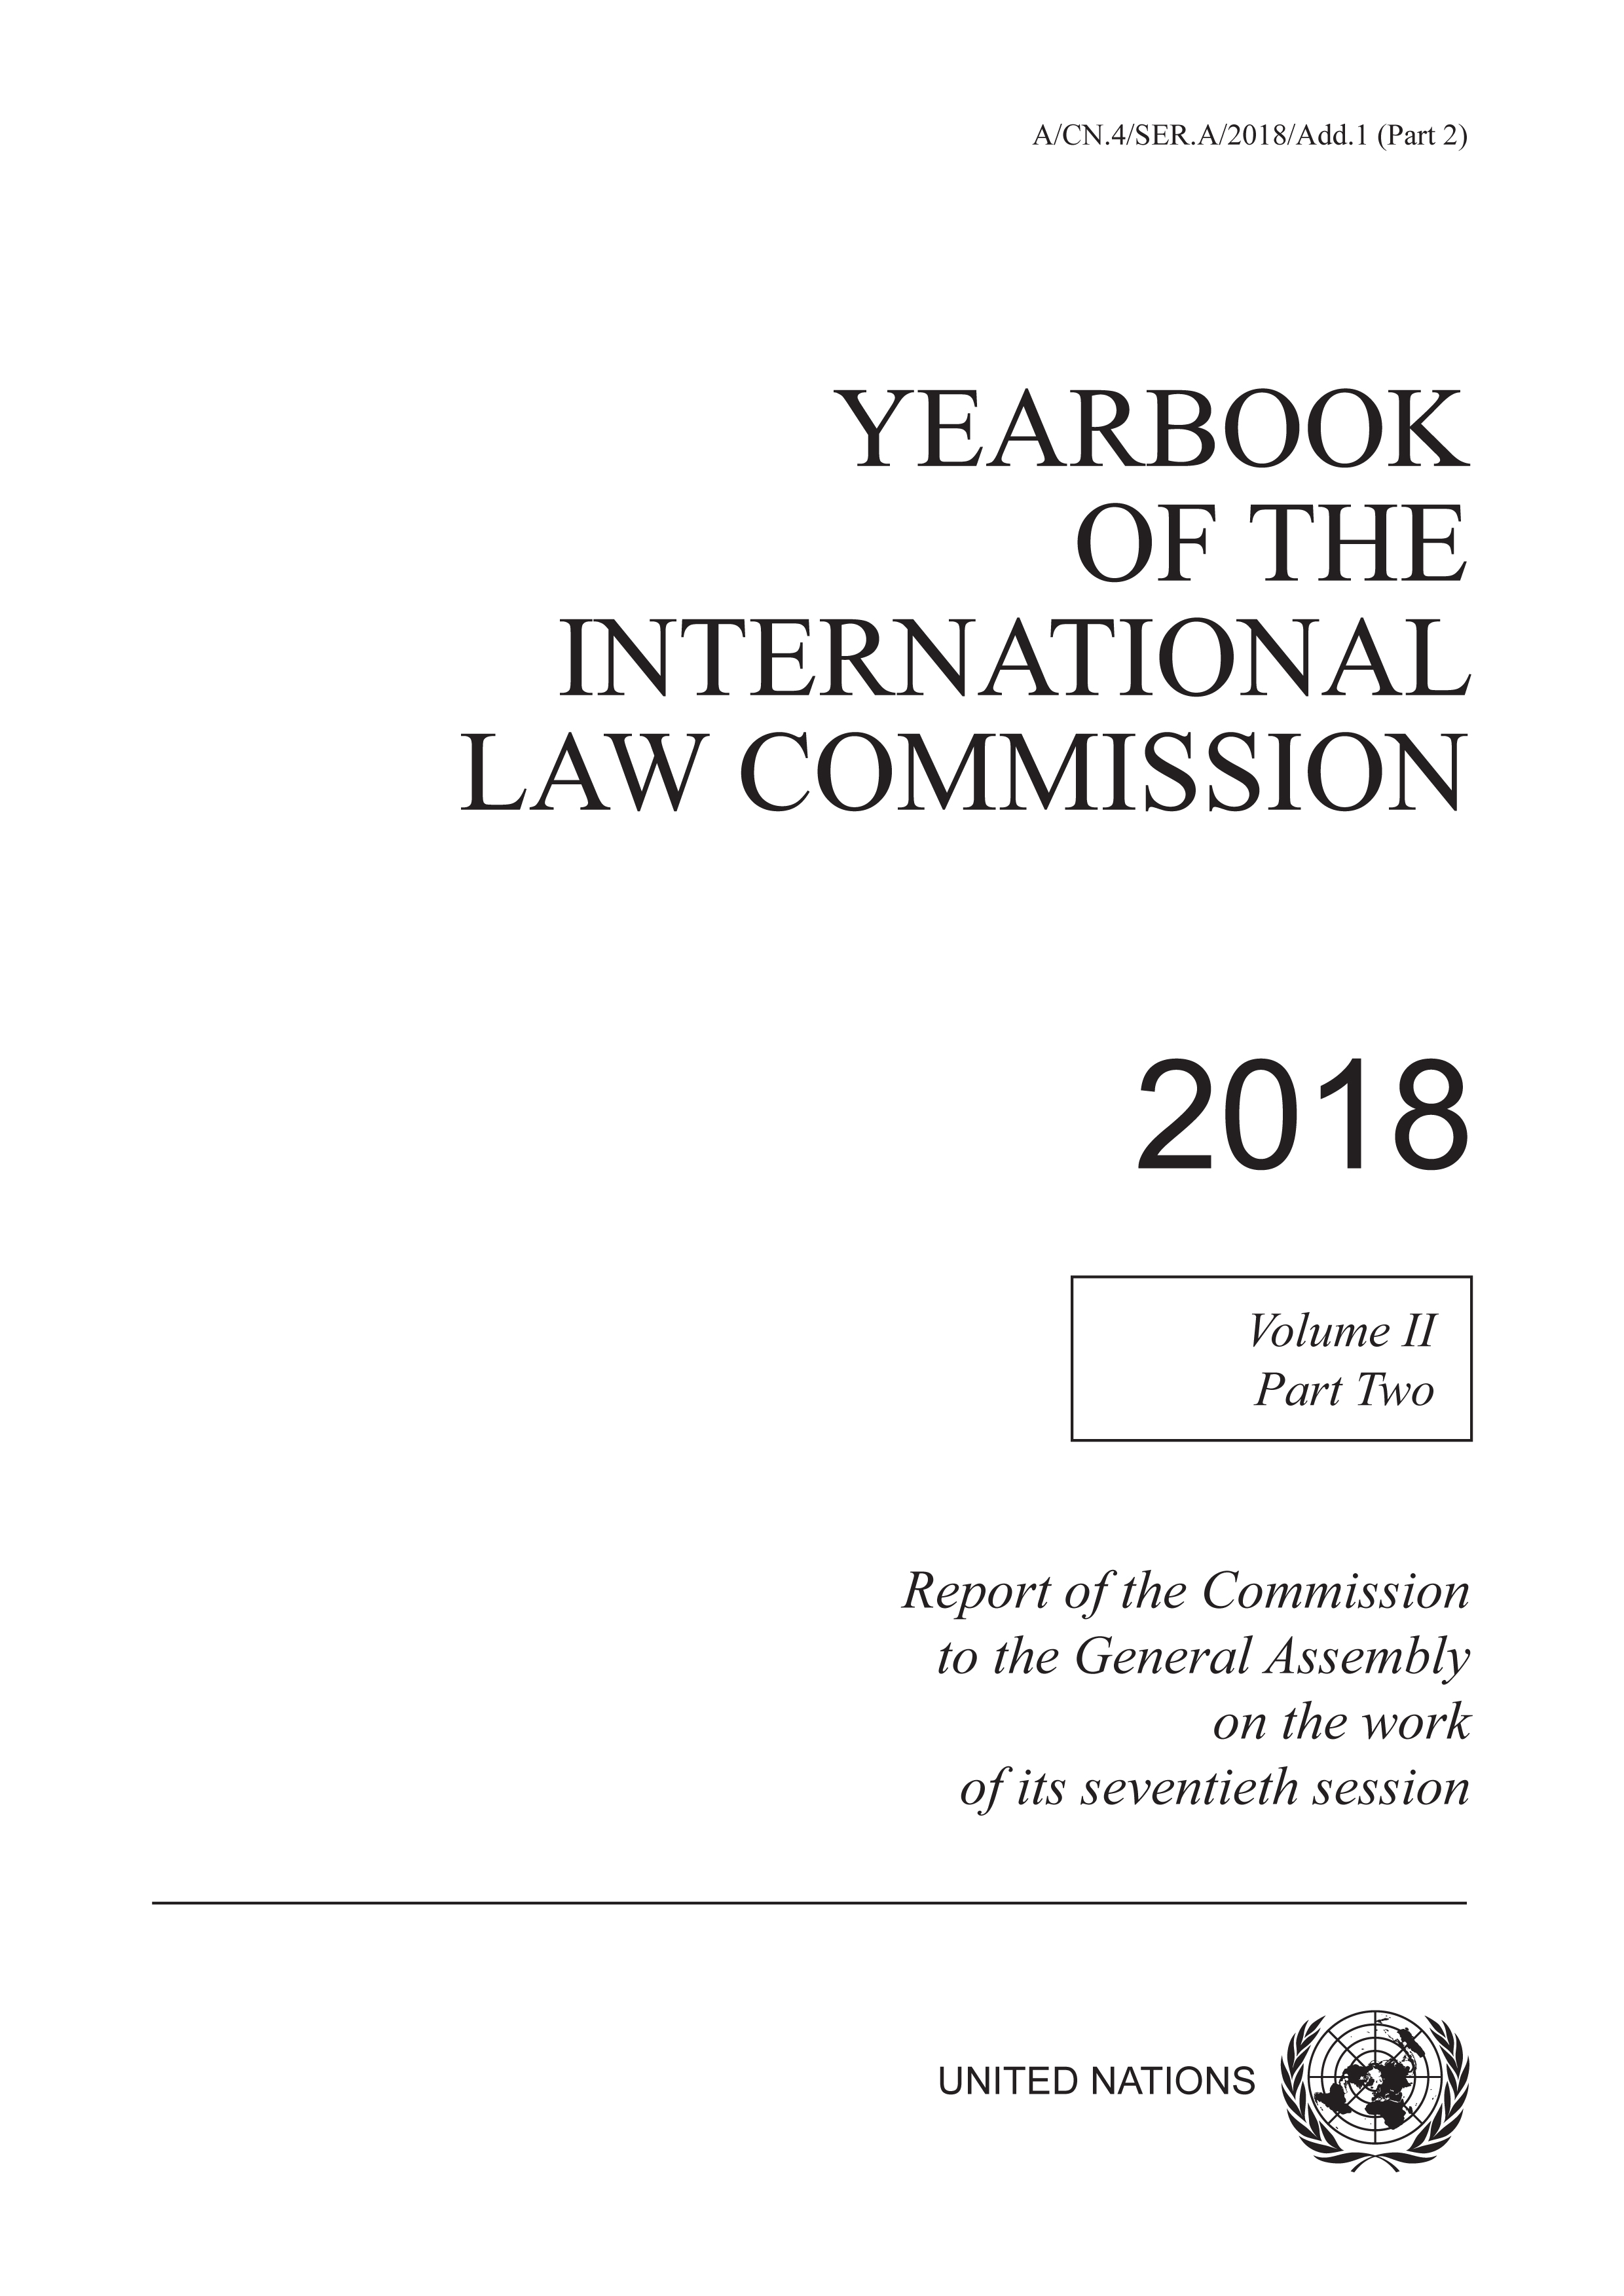 image of Yearbook of the International Law Commission 2018, Vol. II, Part 2